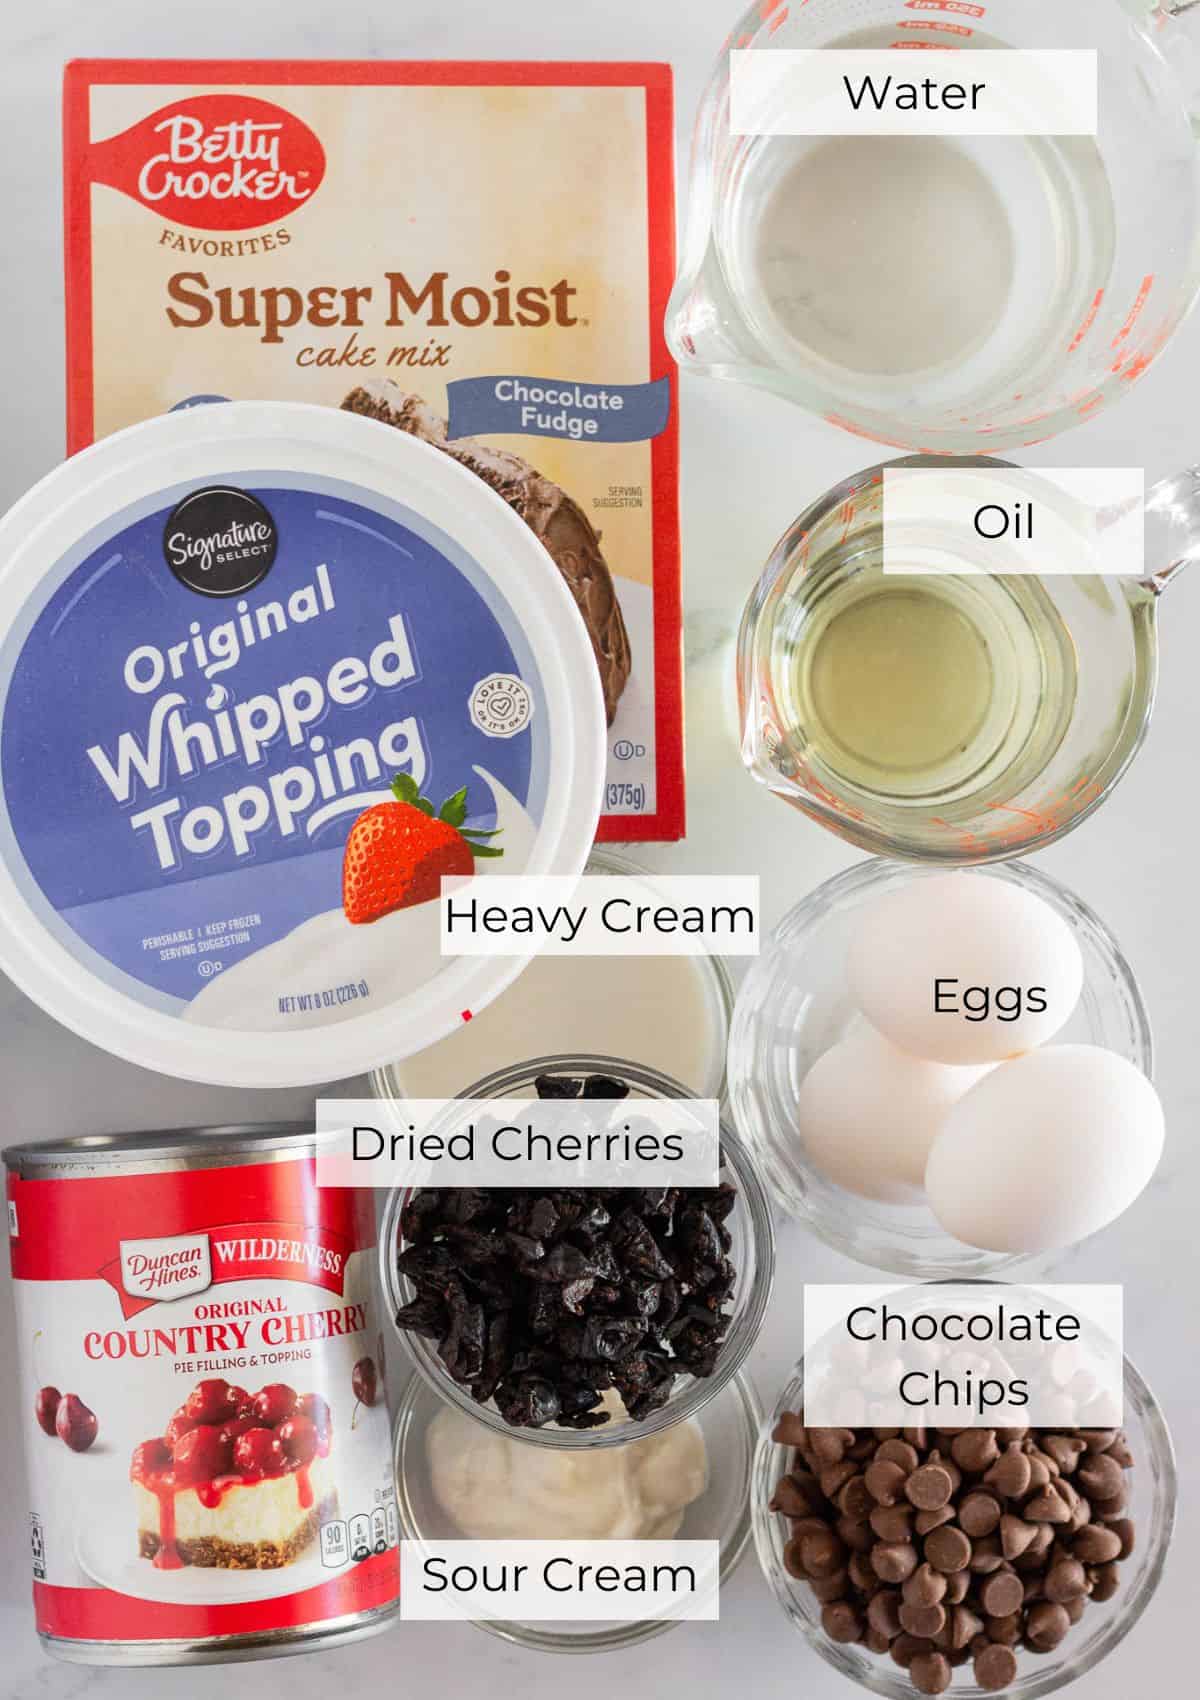 The ingredients needed to make mini black forest cakes with a cake mix.